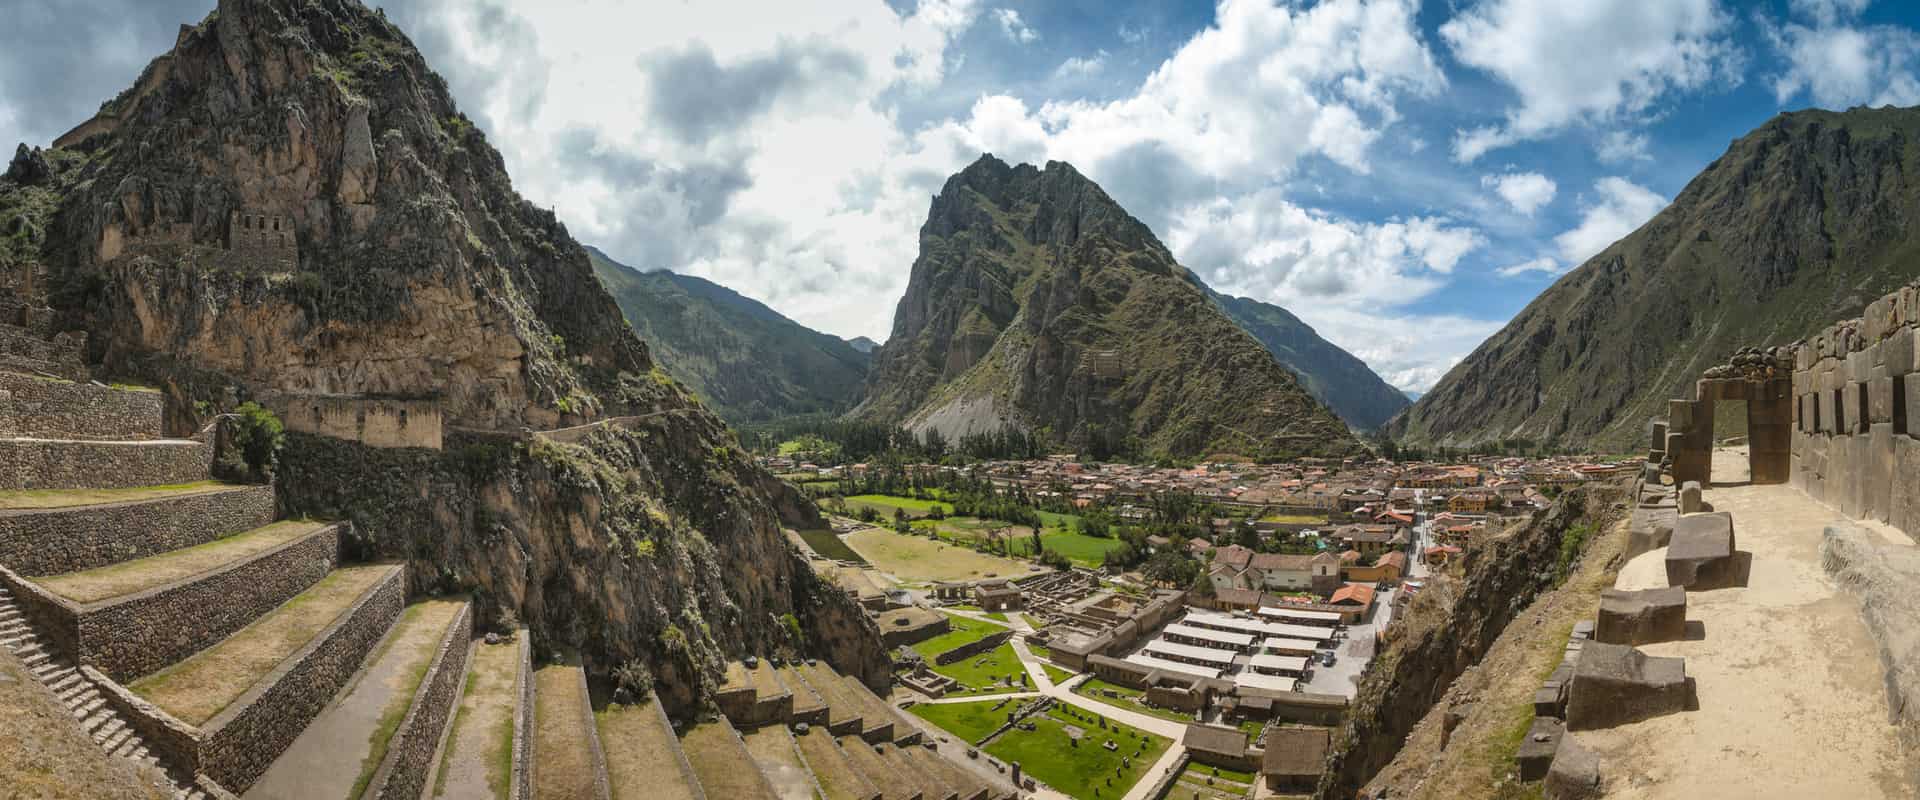 The archaeological site of Ollantaytambo